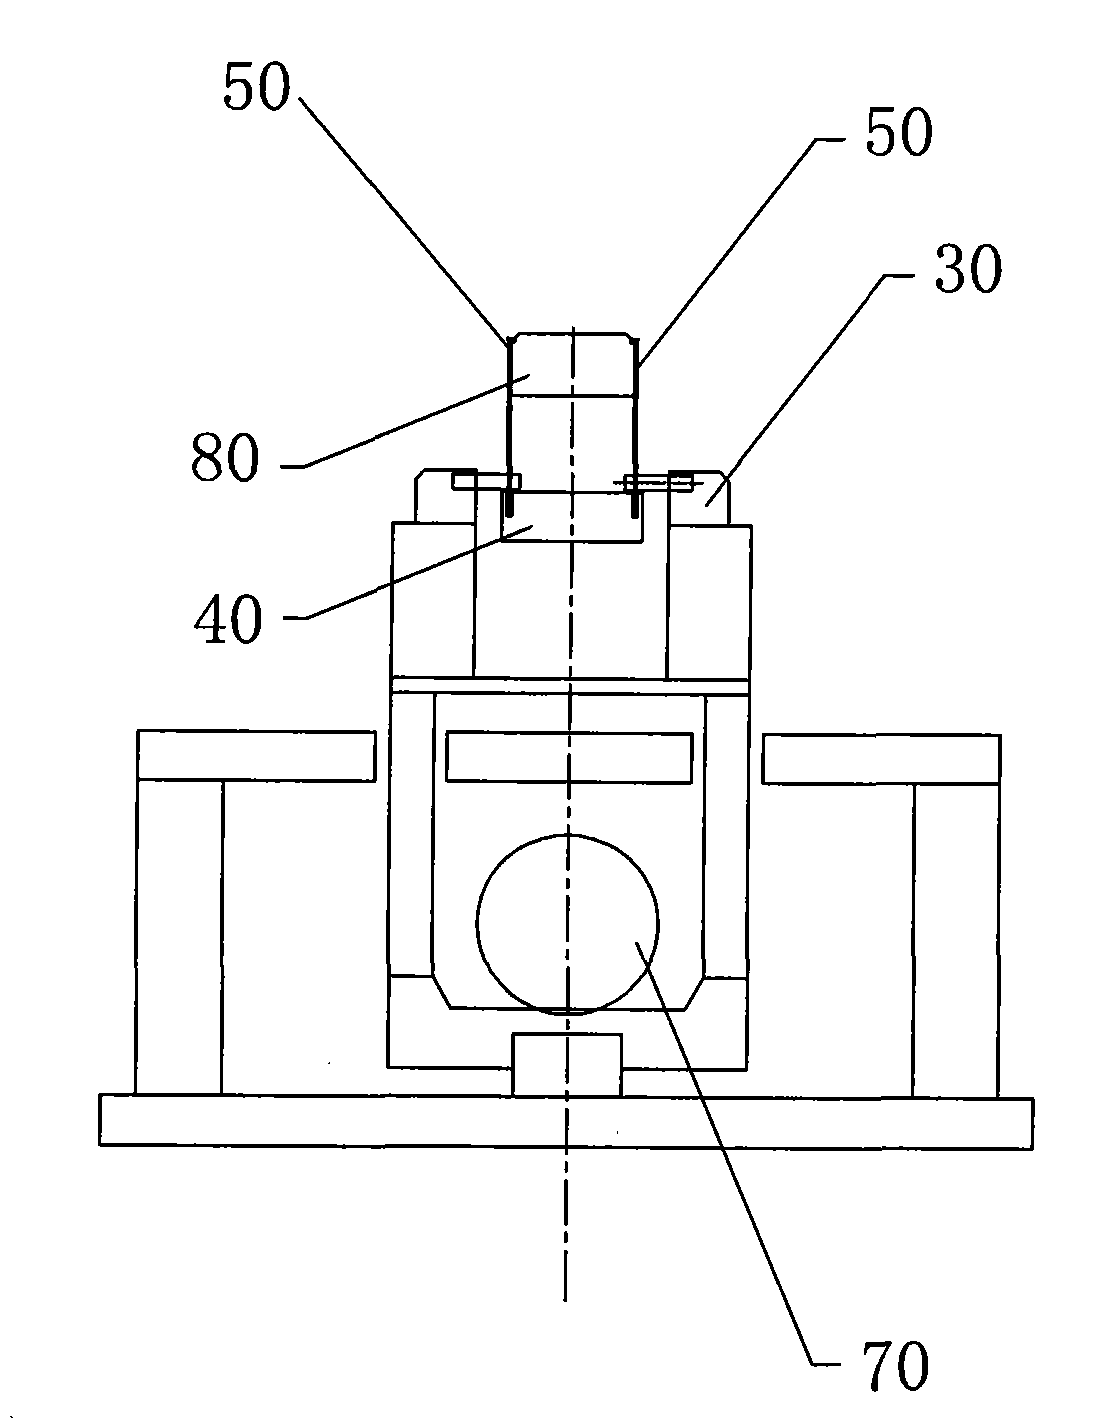 Double-row track feed type system for specific feeding of vertical LED lead frame